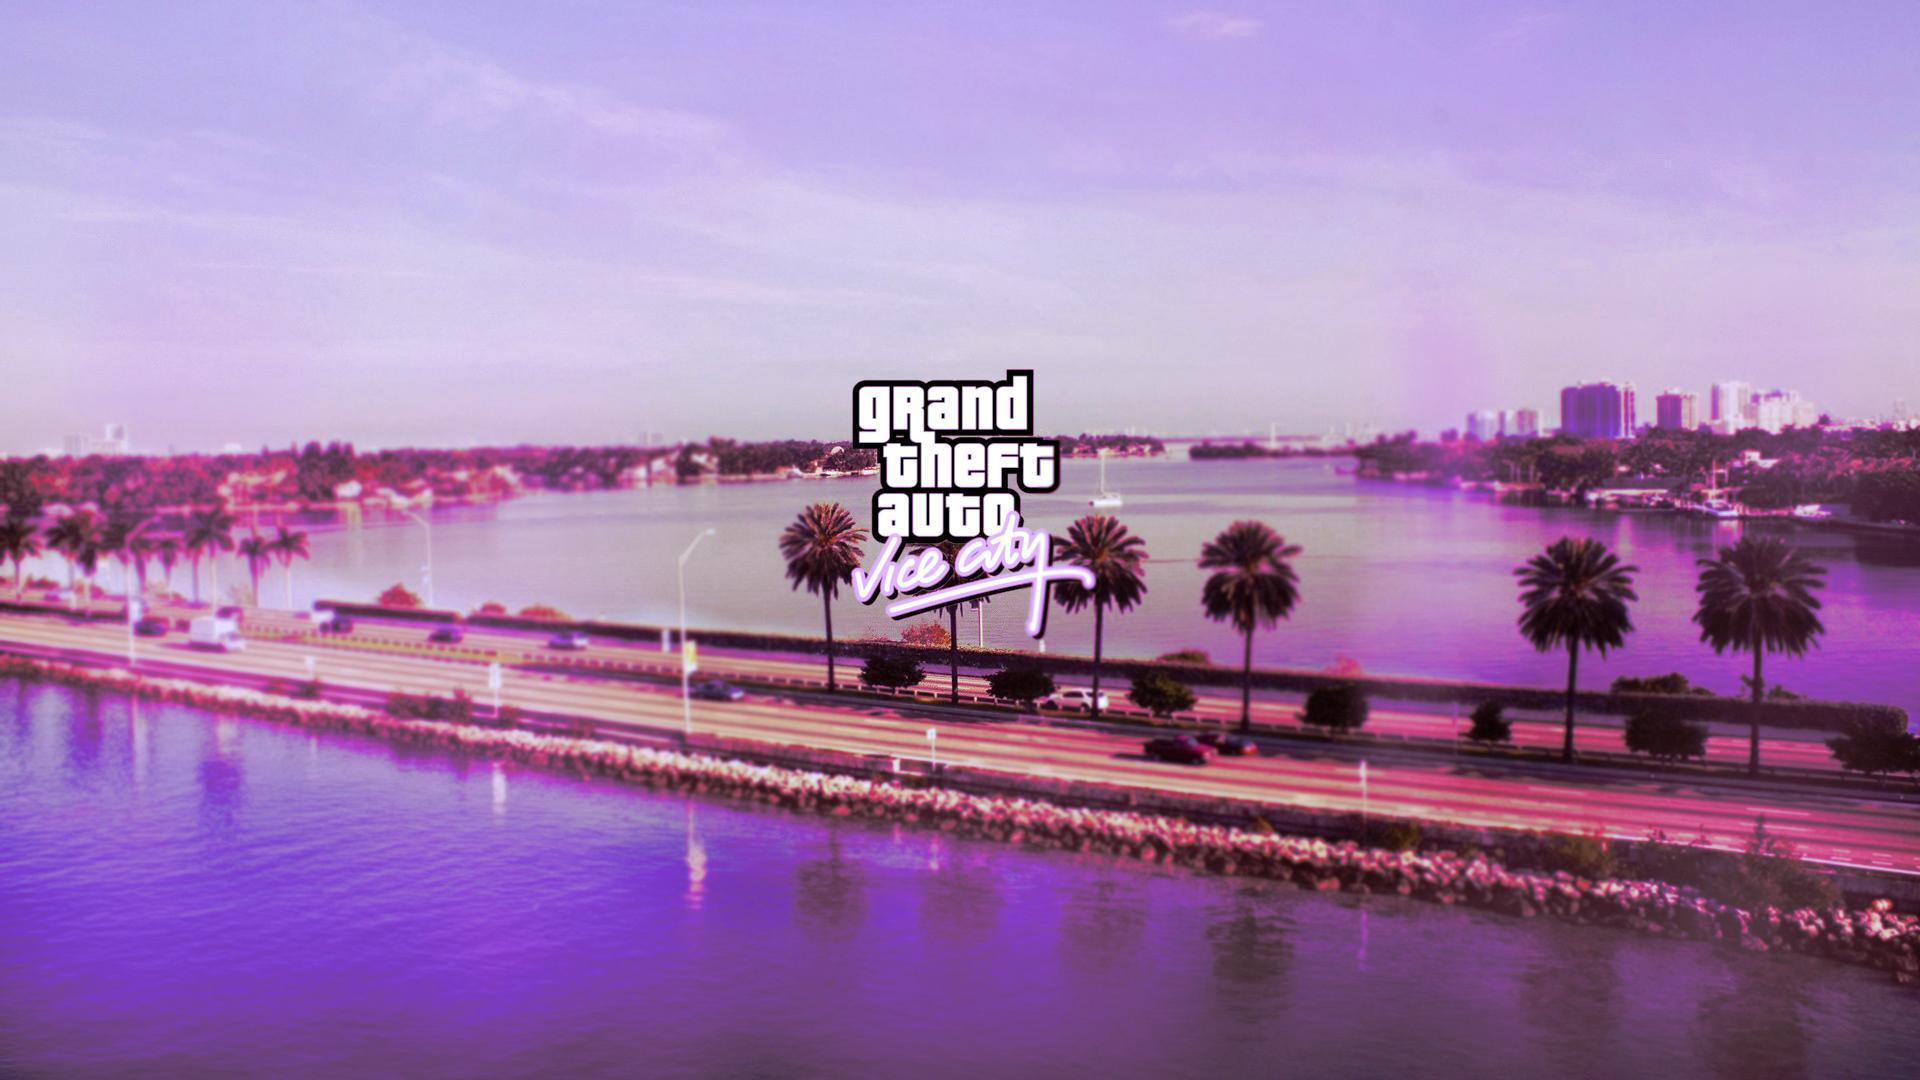 GTA Vice City Wallpaper I made for my friend